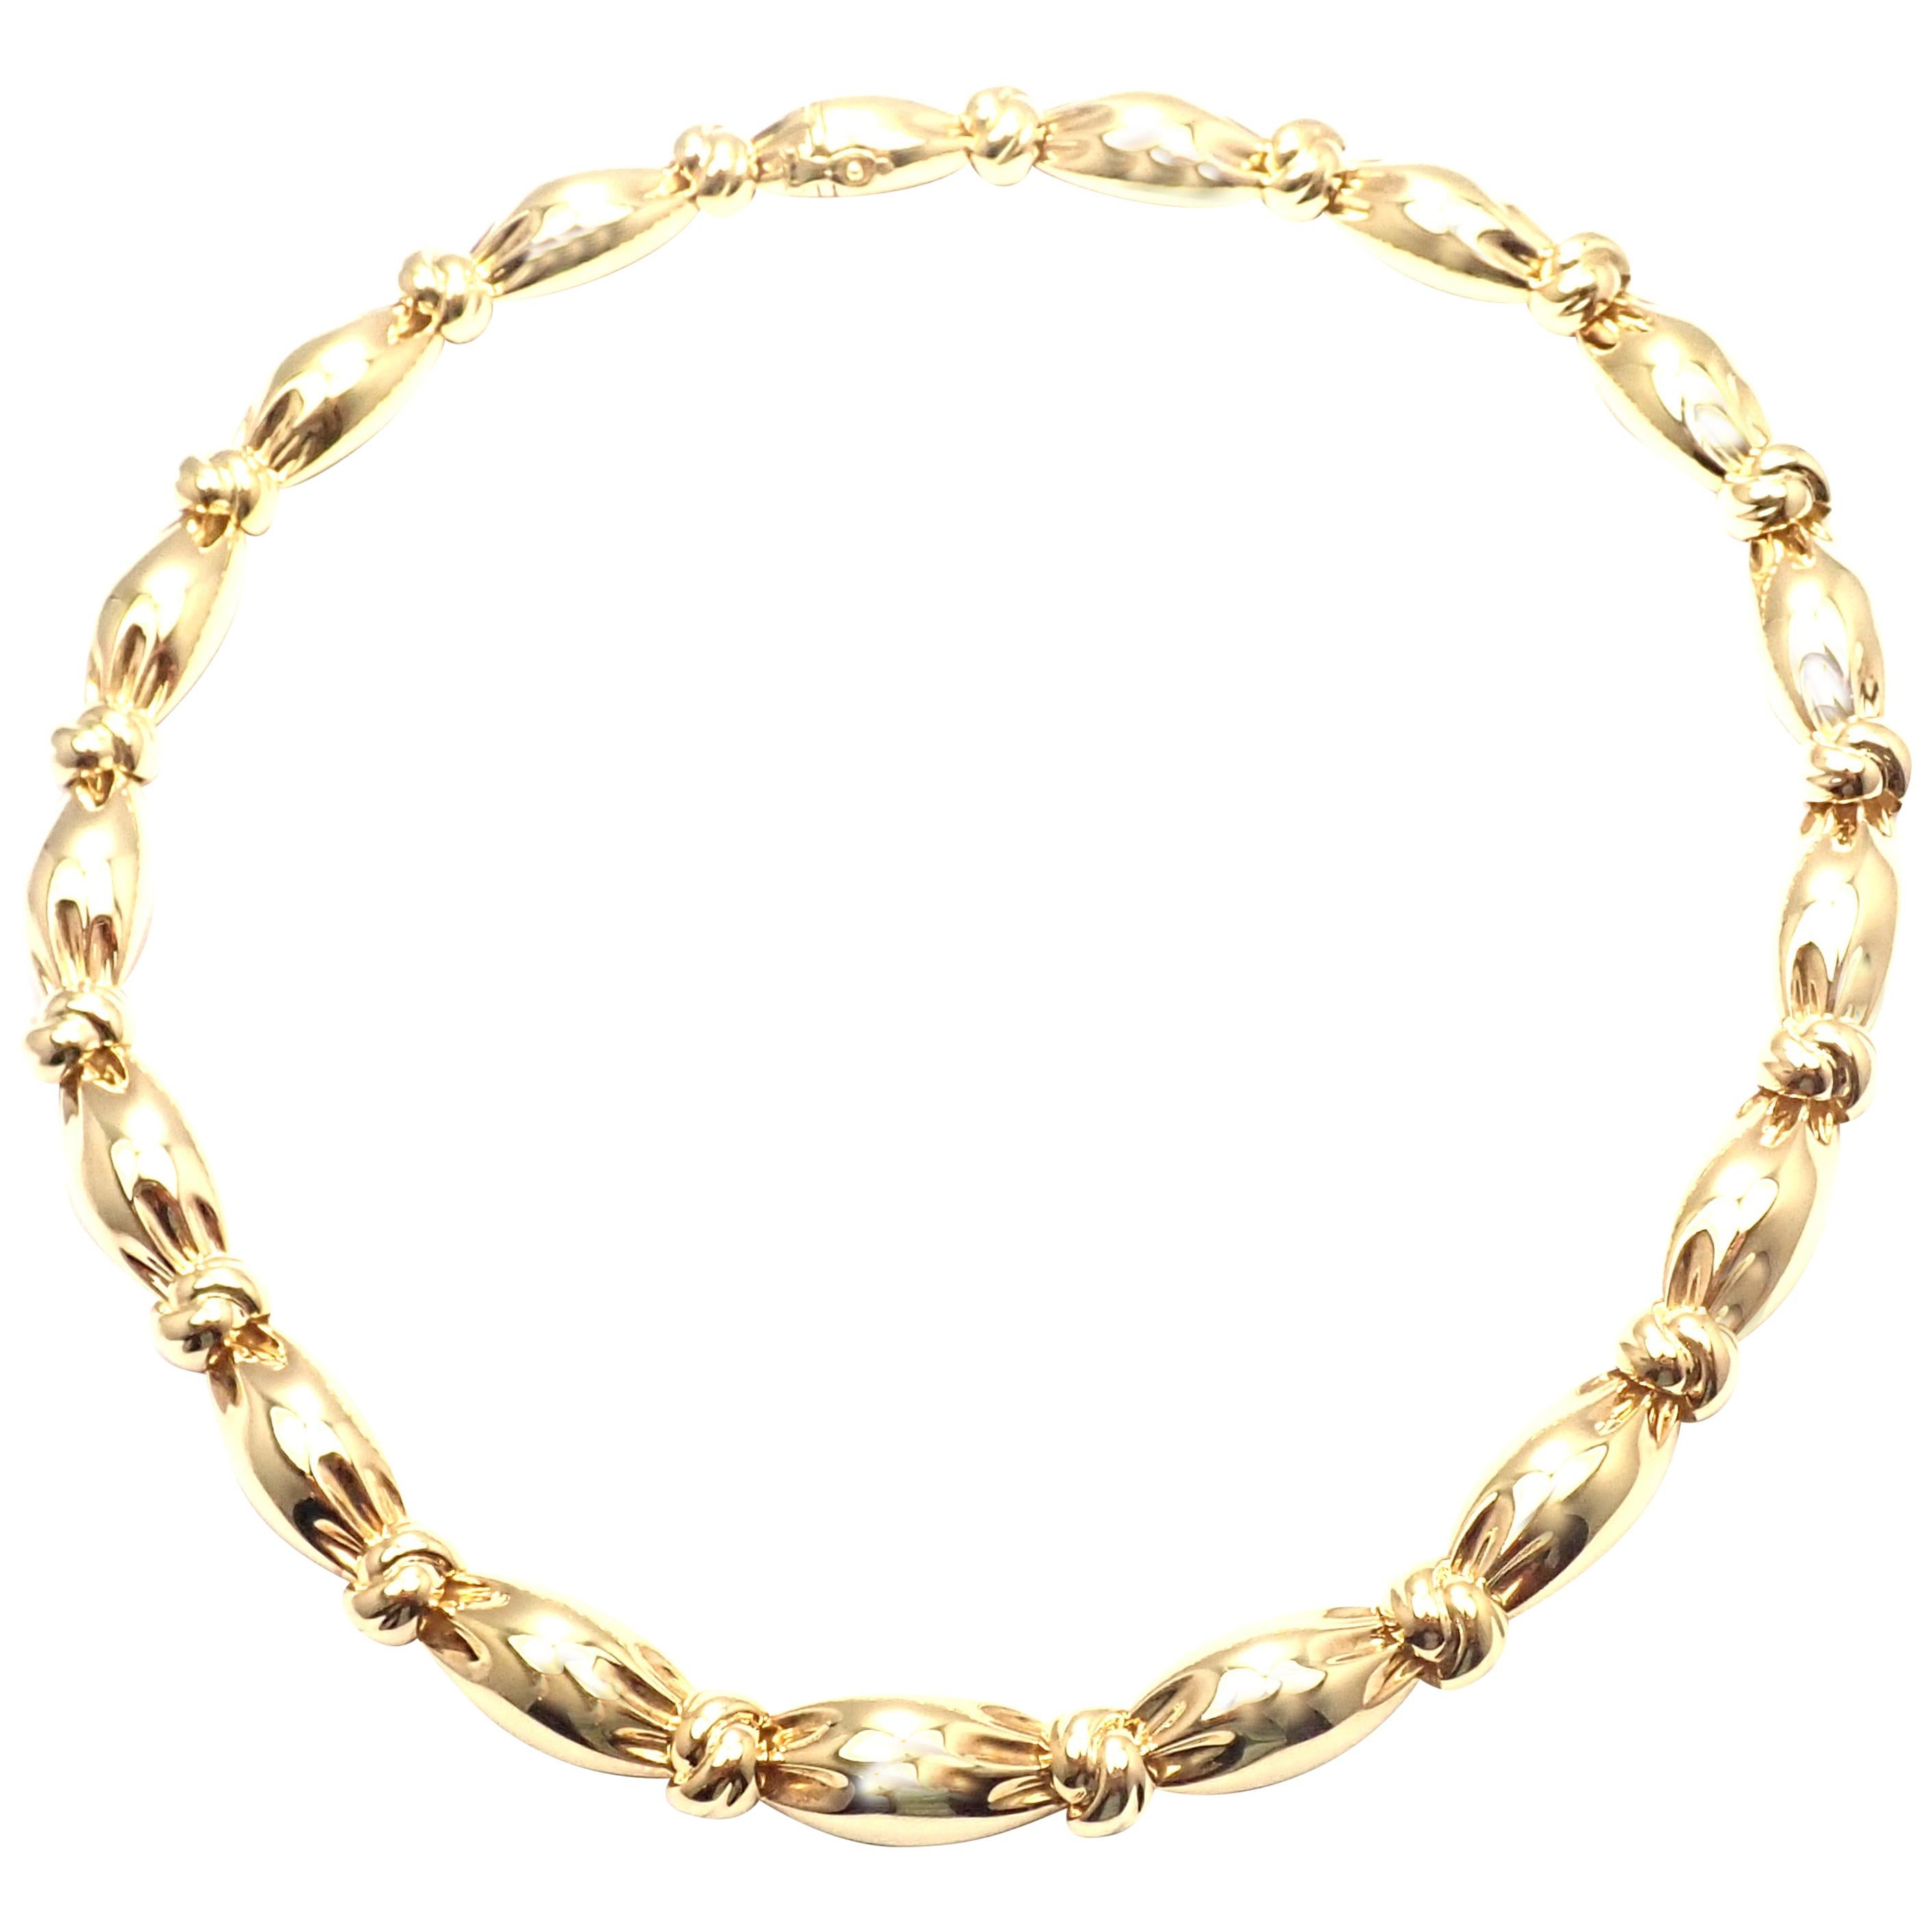 Van Cleef & Arpels Knotted Link Yellow Gold Choker Necklace